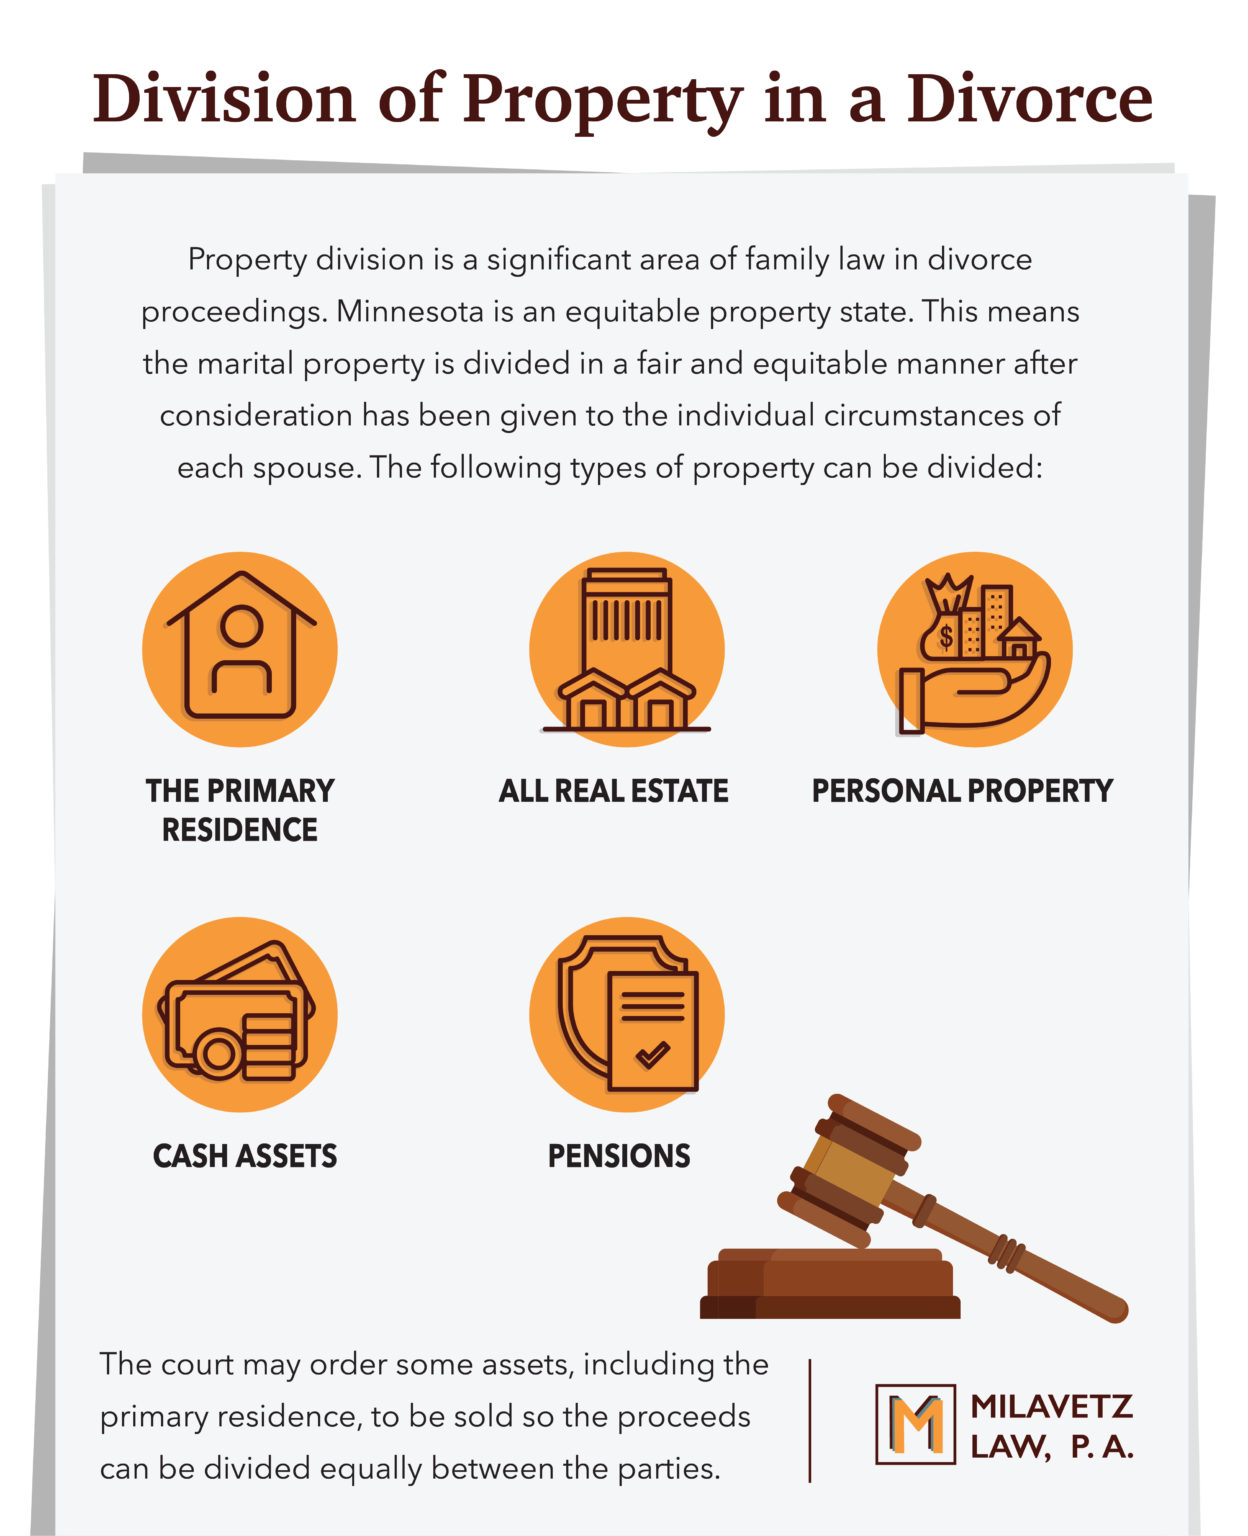 Division of Property in a Divorce Infographic